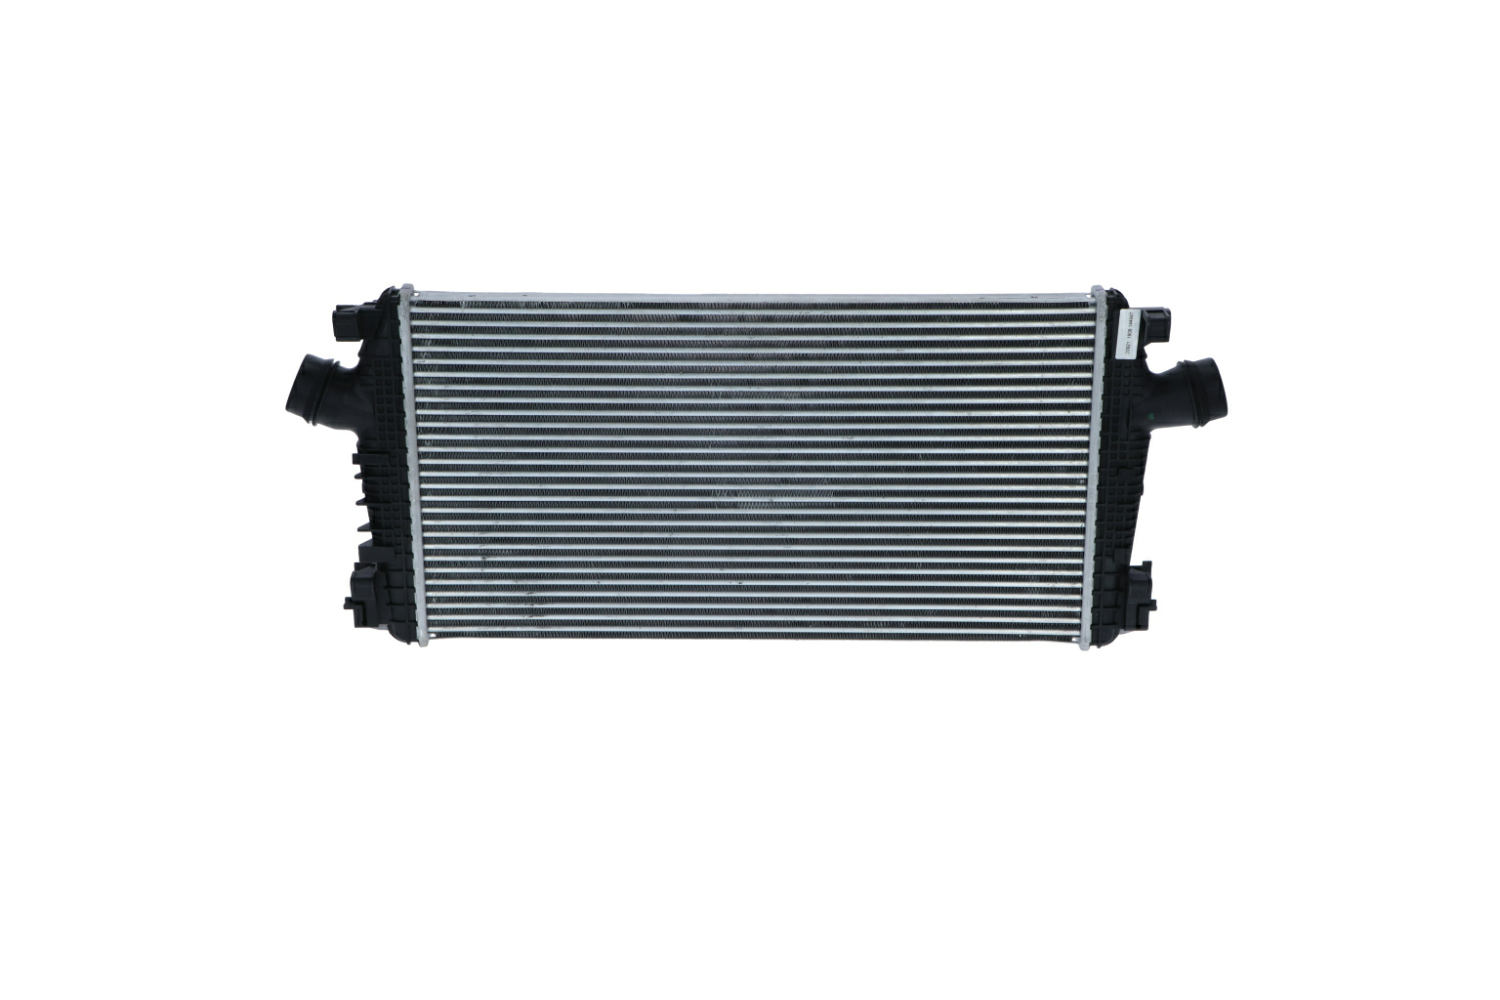 NRF 30921 Opel INSIGNIA 2011 Intercooler charger